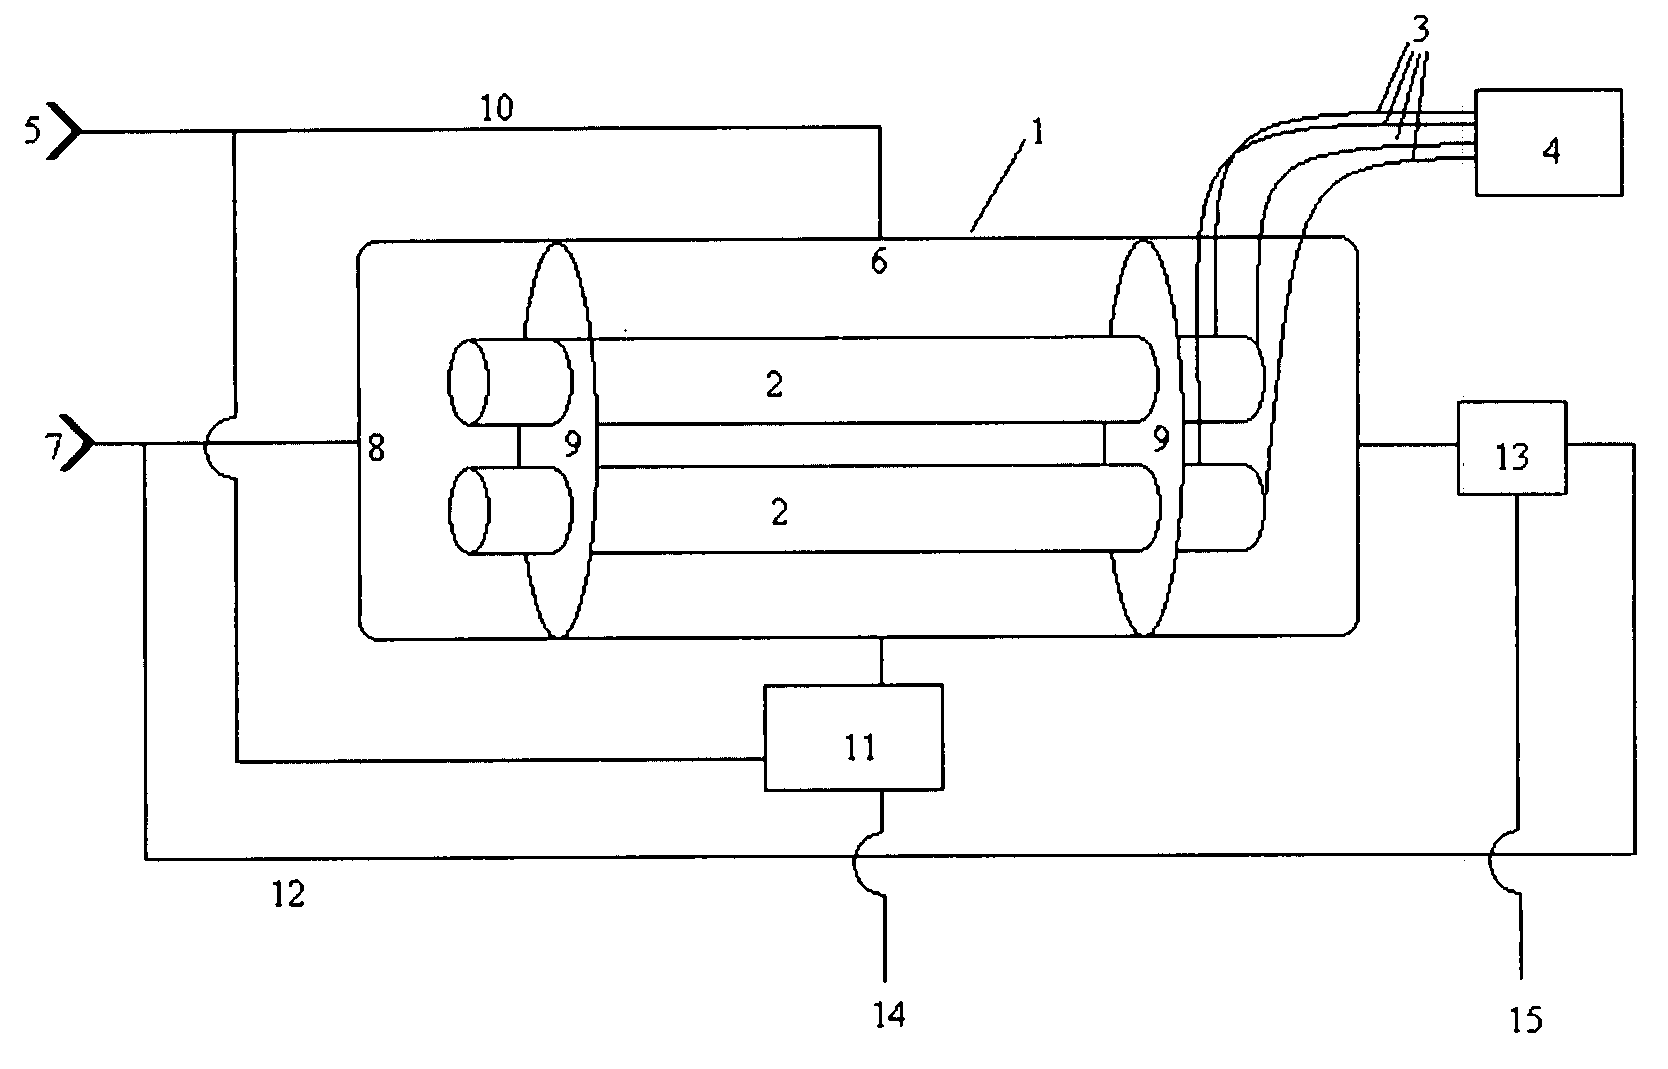 Method and apparatus for anhydrous ammonia production